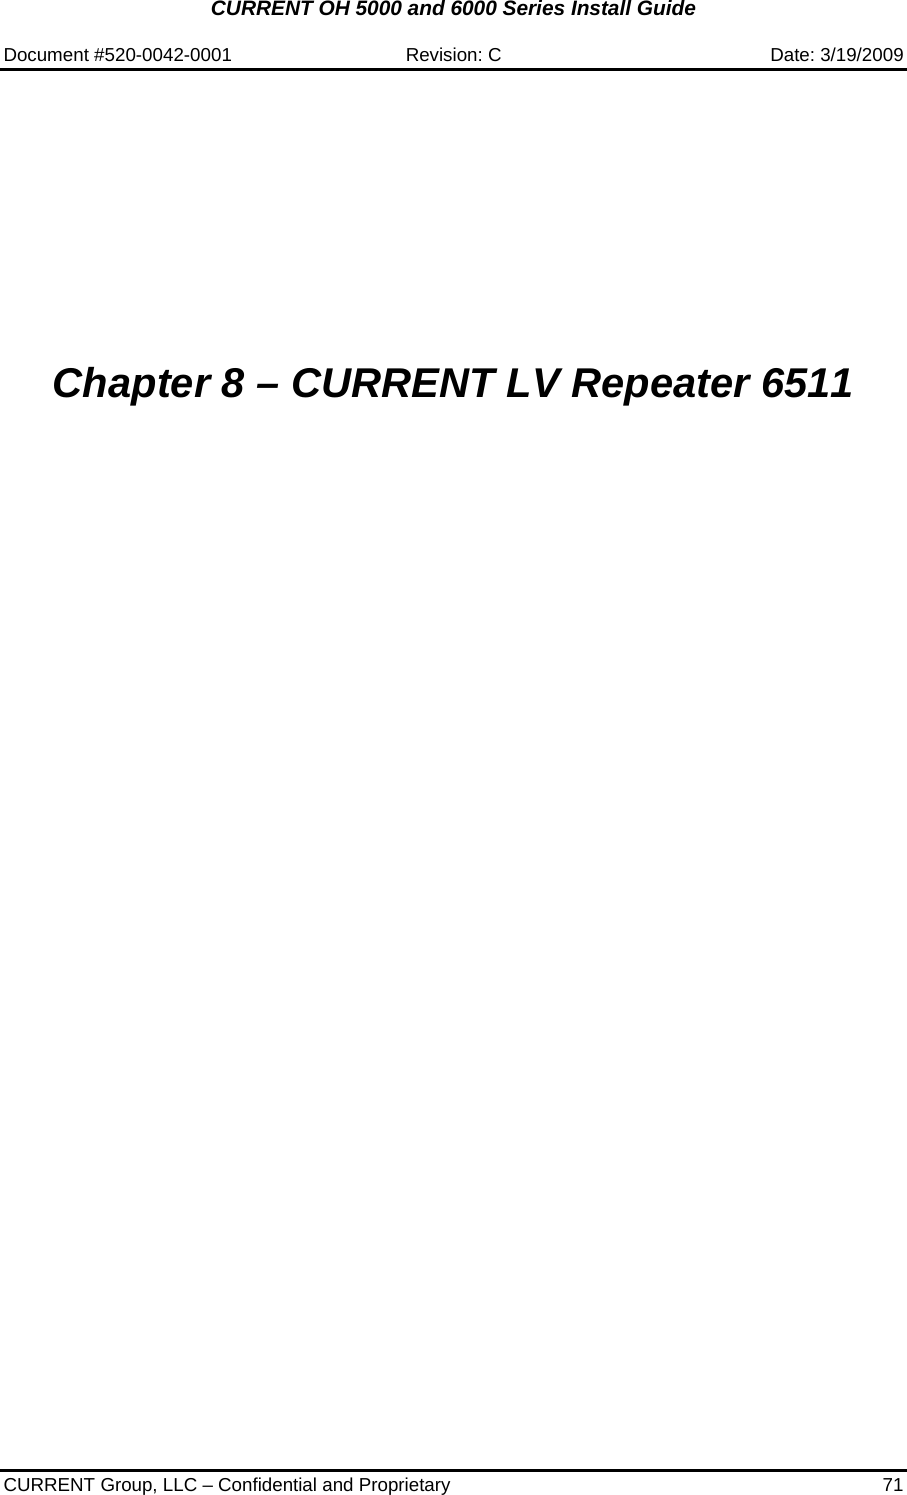 CURRENT OH 5000 and 6000 Series Install Guide  Document #520-0042-0001  Revision: C  Date: 3/19/2009  CURRENT Group, LLC – Confidential and Proprietary  71           Chapter 8 – CURRENT LV Repeater 6511           